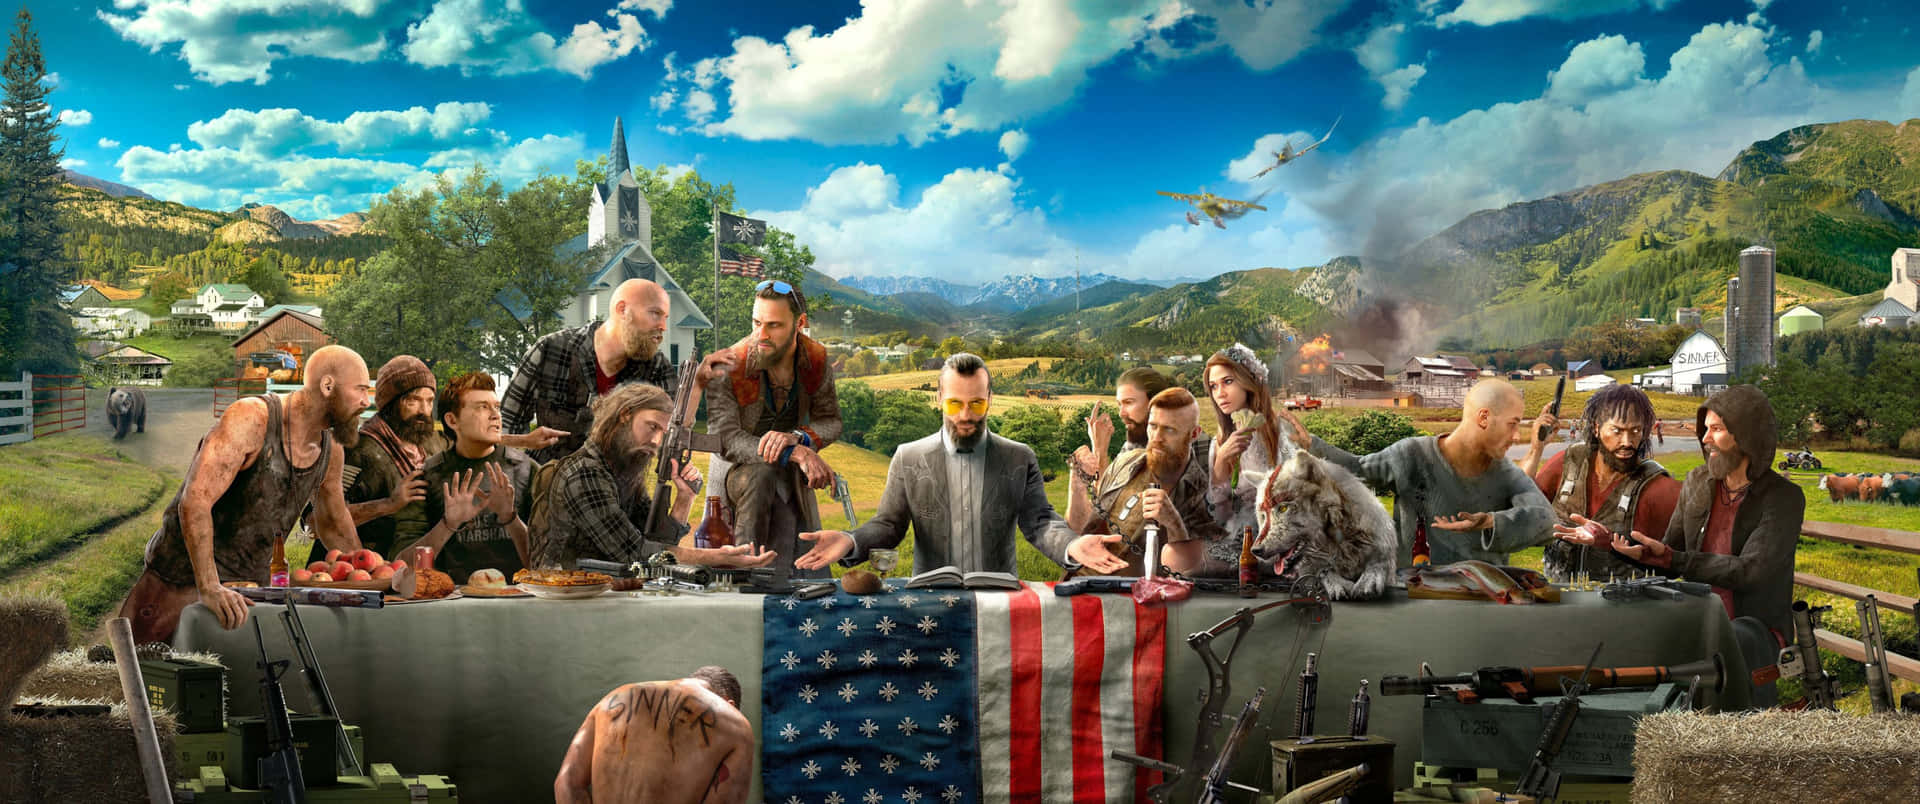 Stand your ground against violent opponents in "Far Cry 5"